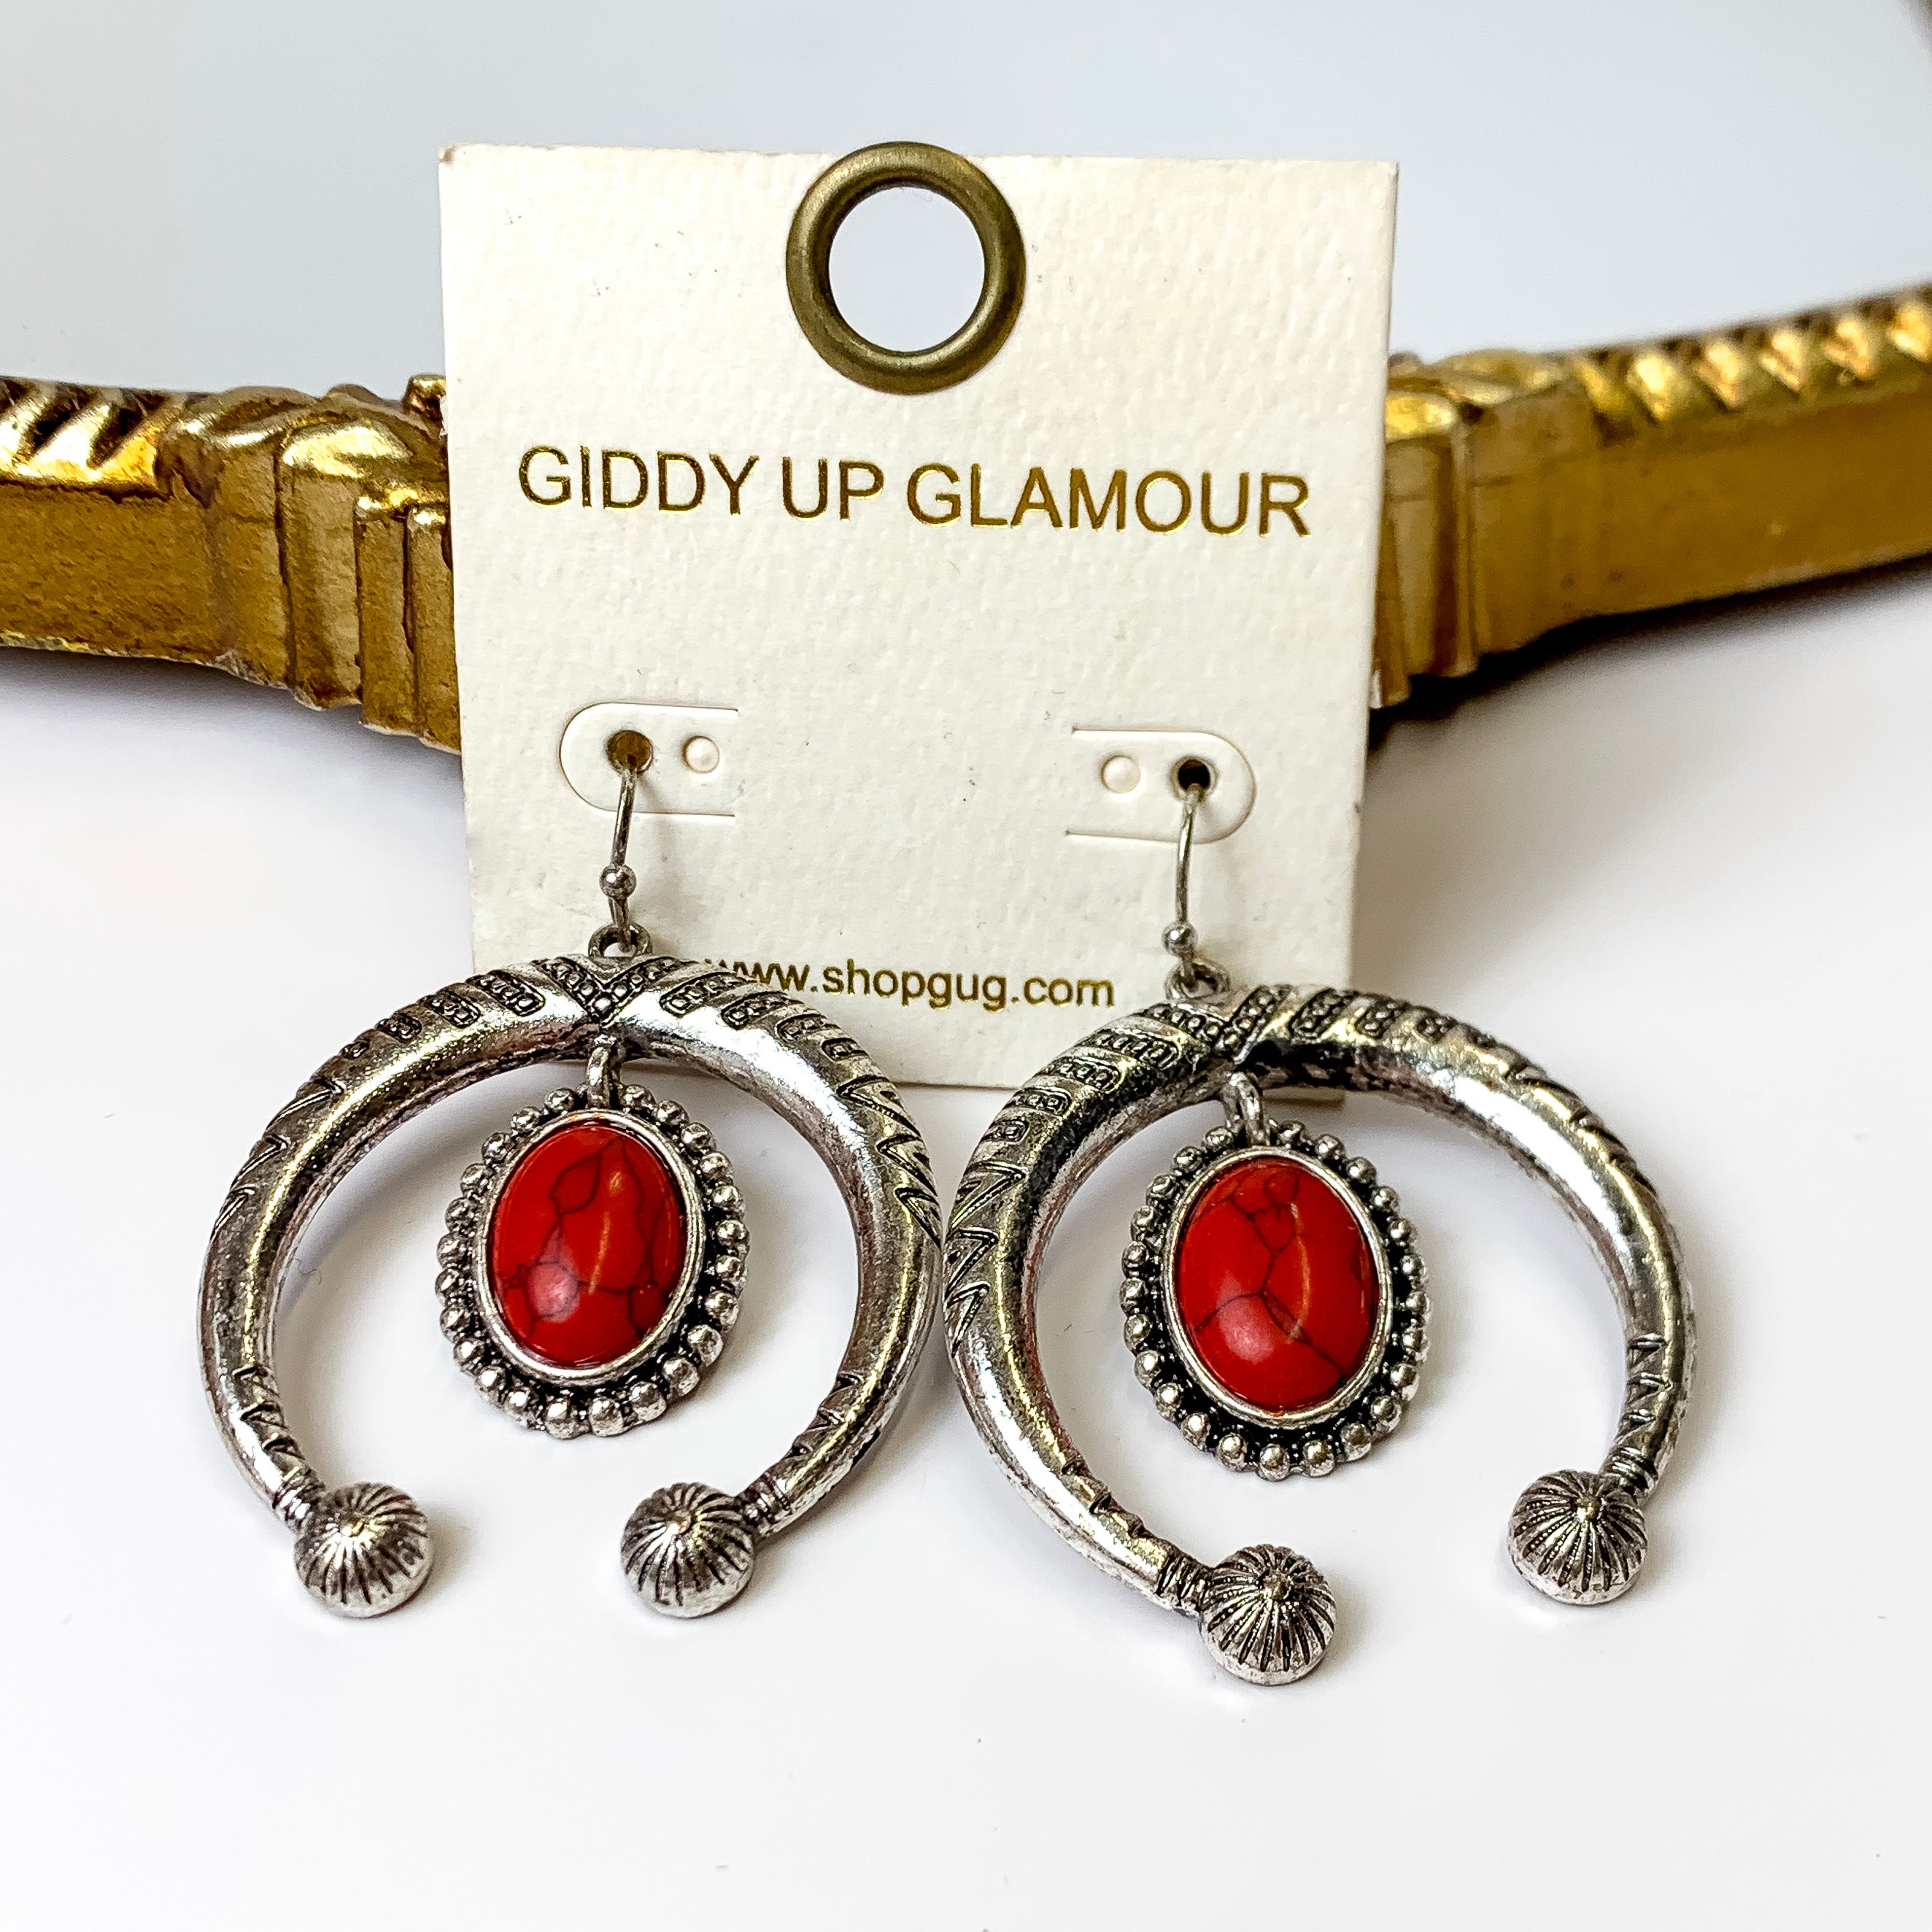 Silver Tone Naja Pendant Earrings with Oval Stone Dangle in Red - Giddy Up Glamour Boutique